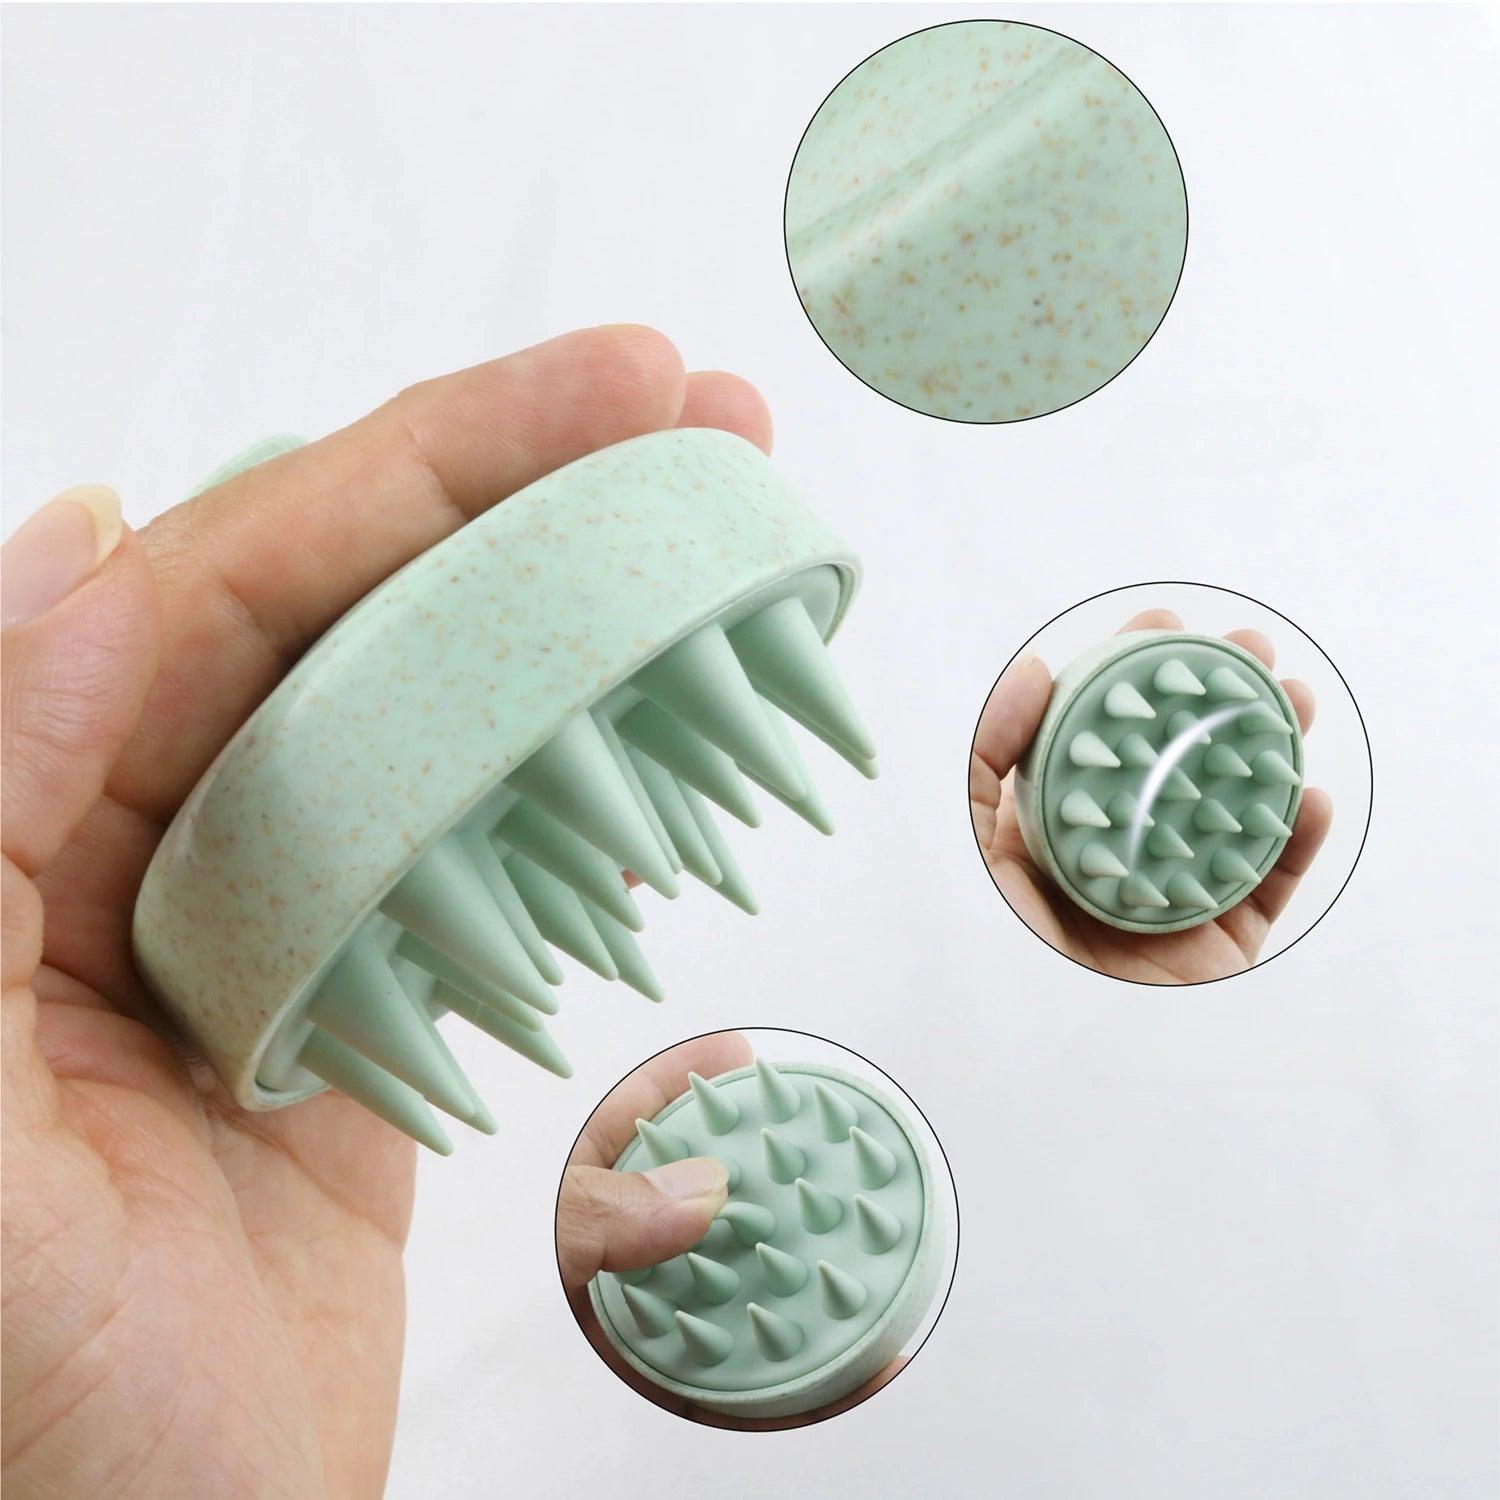 Silicone Scalp Massage Brush for Hair Care and Body Relaxation  ourlum.com   